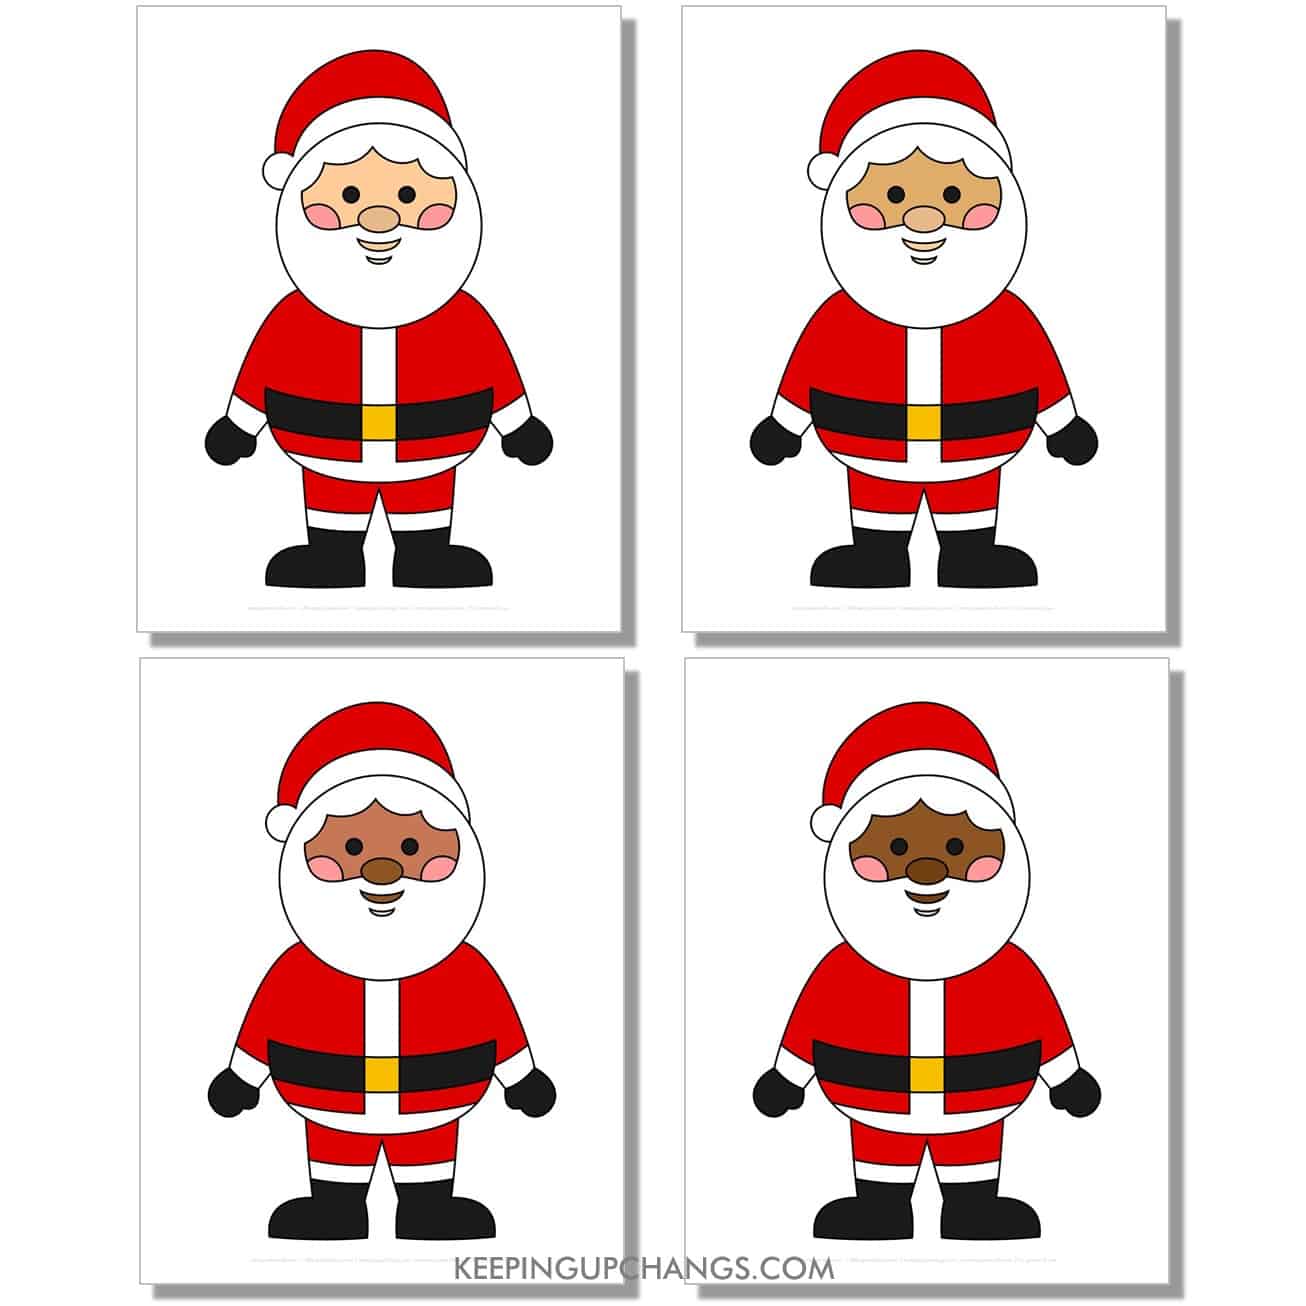 free big, large standing santa outline, cut out template in color, red, black, white for light, medium, dark skin tones, races.